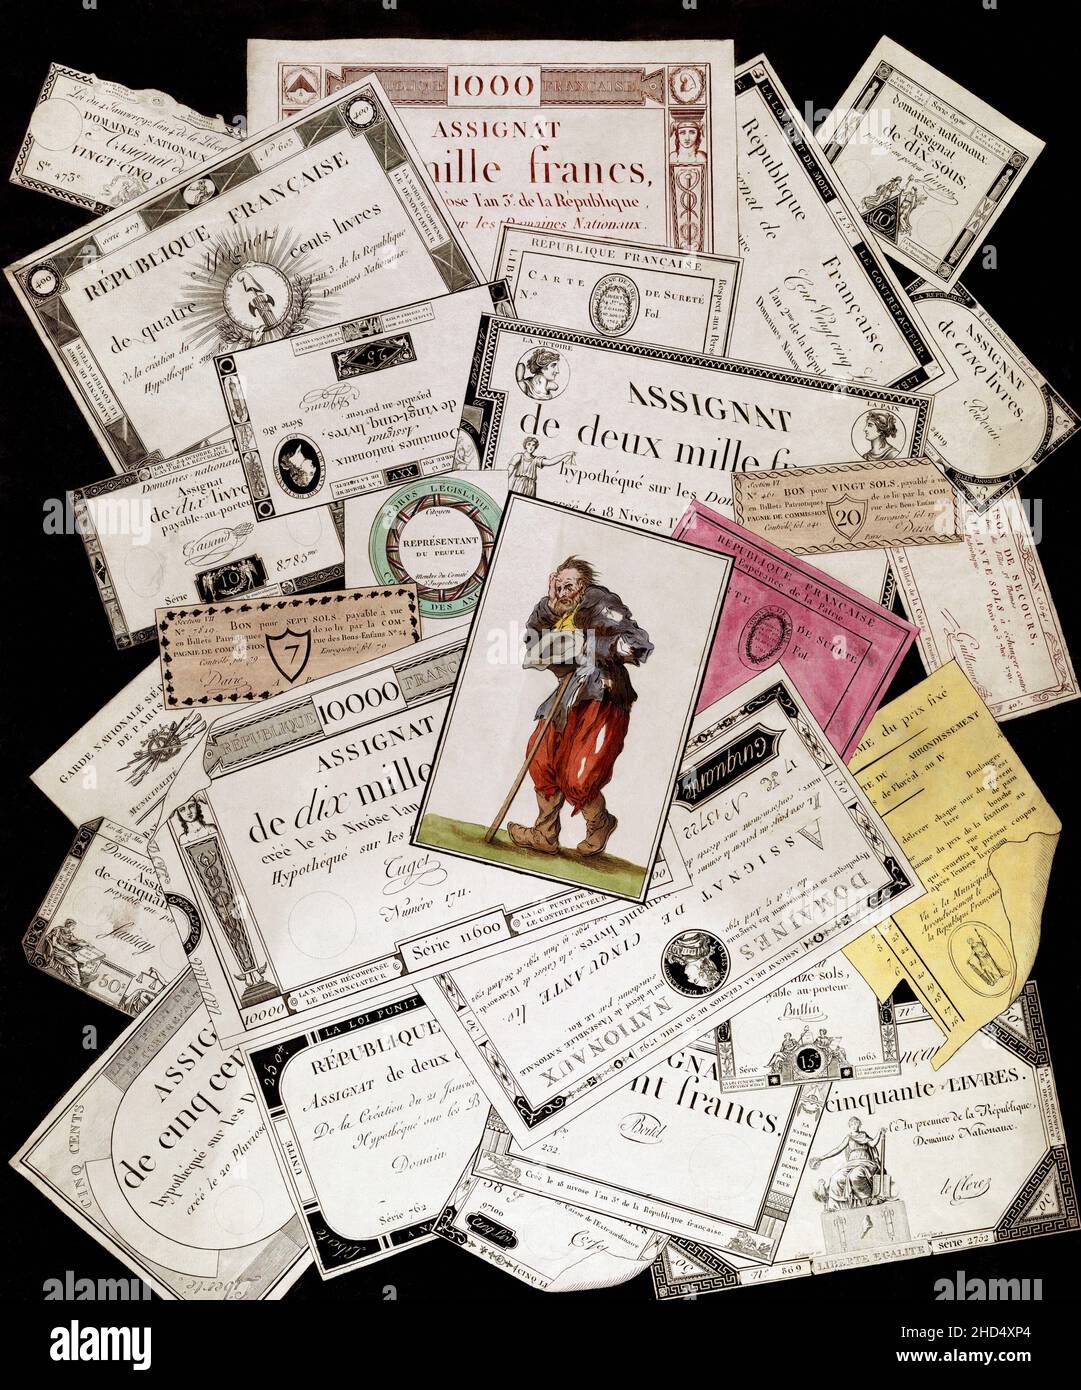 Assignats, paper bills issued as currency from 1789 to 1796 during the French Revolution.  They were initially backed by the value of expropriated properties, but as those properties were sold and still more assignats were issued the system succumbed to inflation.  The Tarot card of The Fool, or The Beggar, on top of the assignats sums up the poor man's lot during the latter years of the assignats hyperinflation. Stock Photo